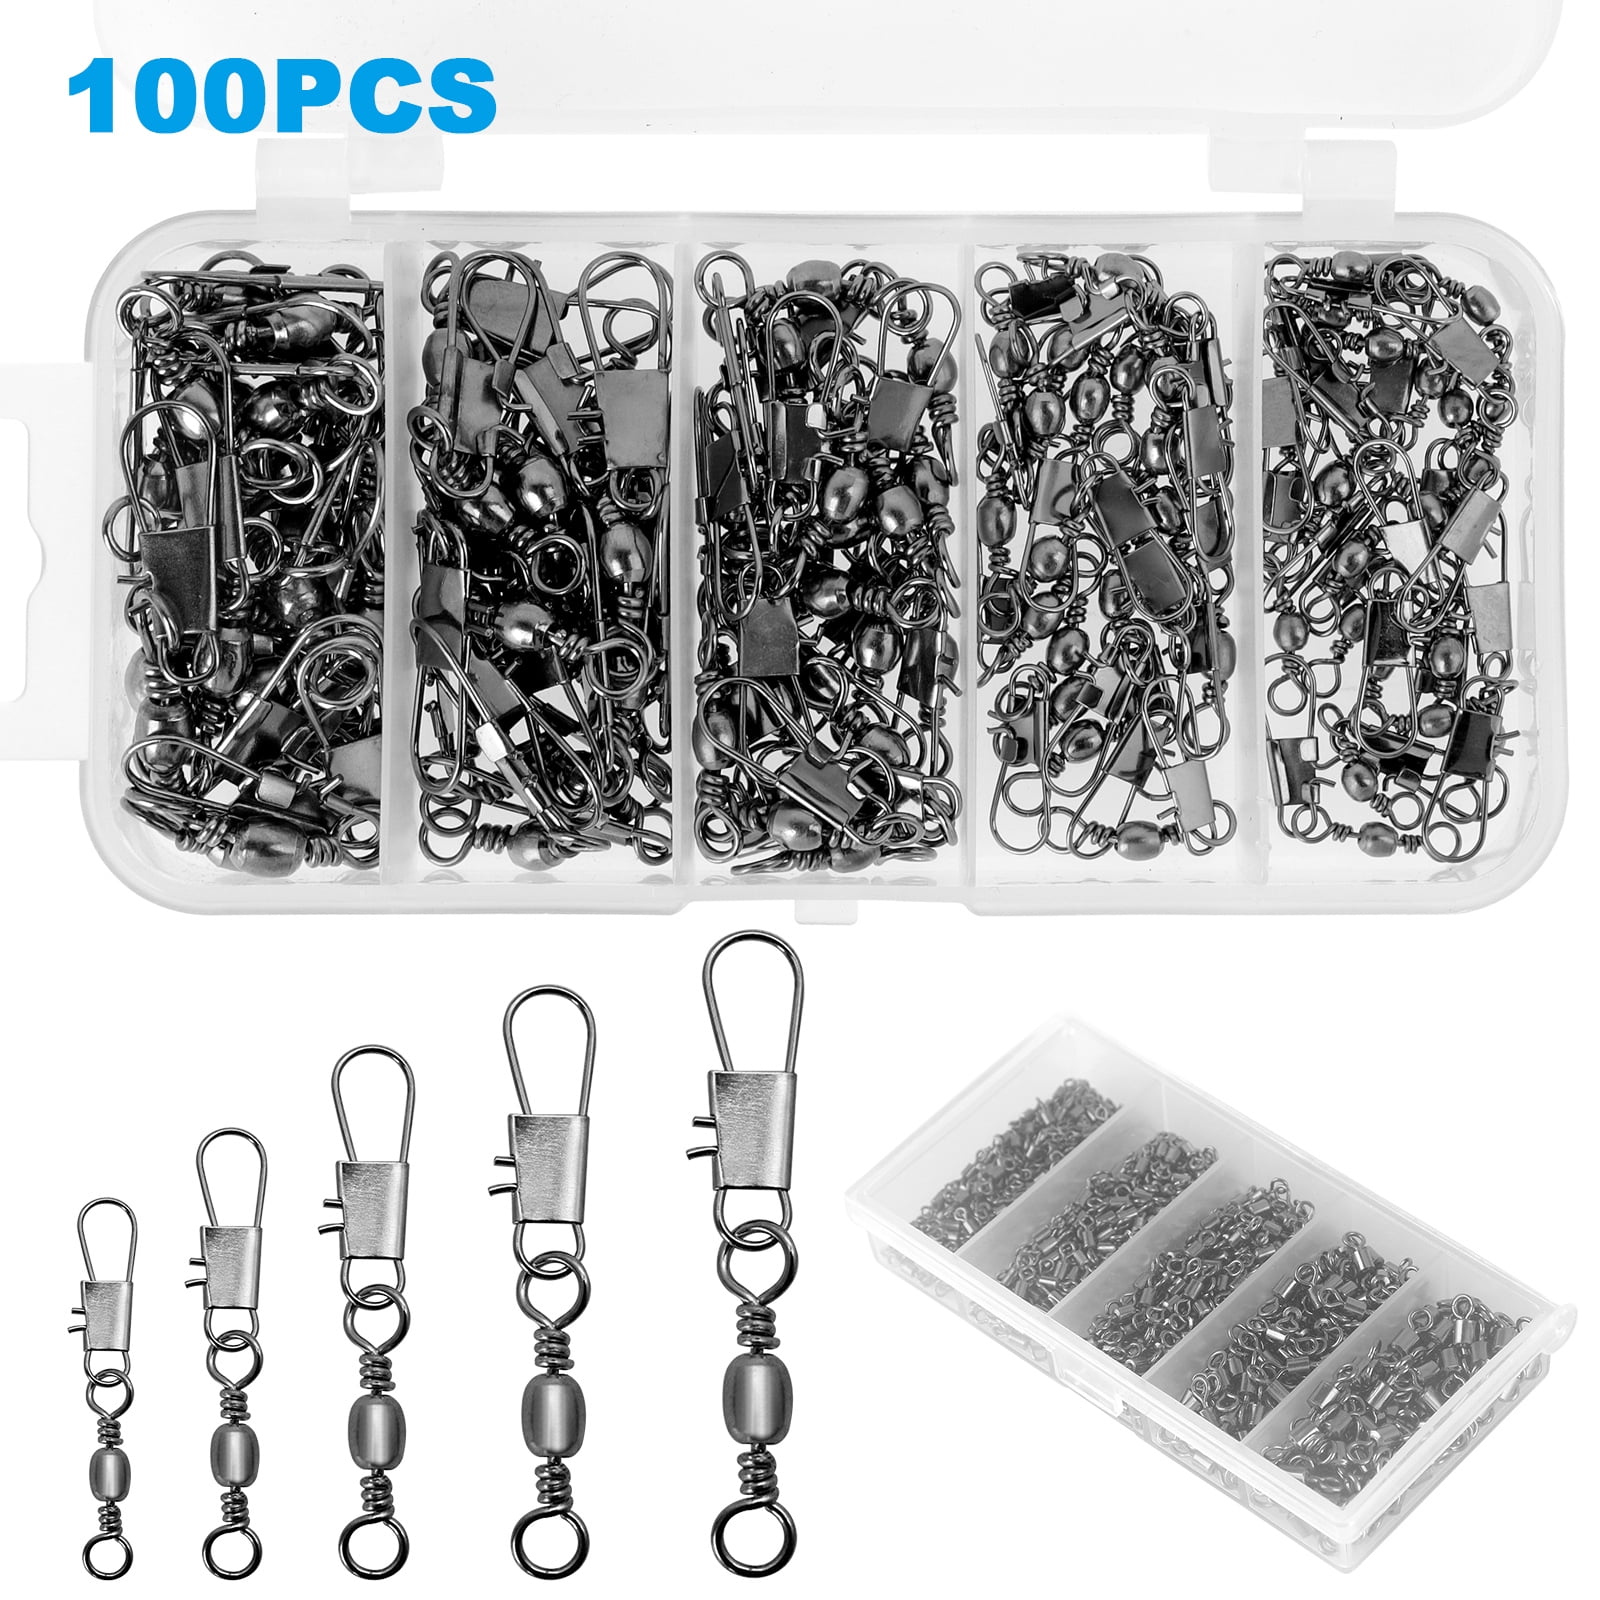 200/100pcs Fishing Ball Bearing Barrel Swivel Lock Snap Connector, TSV Stainless Steel High-Strength Rolling Swivels for Freshwater and Saltwater